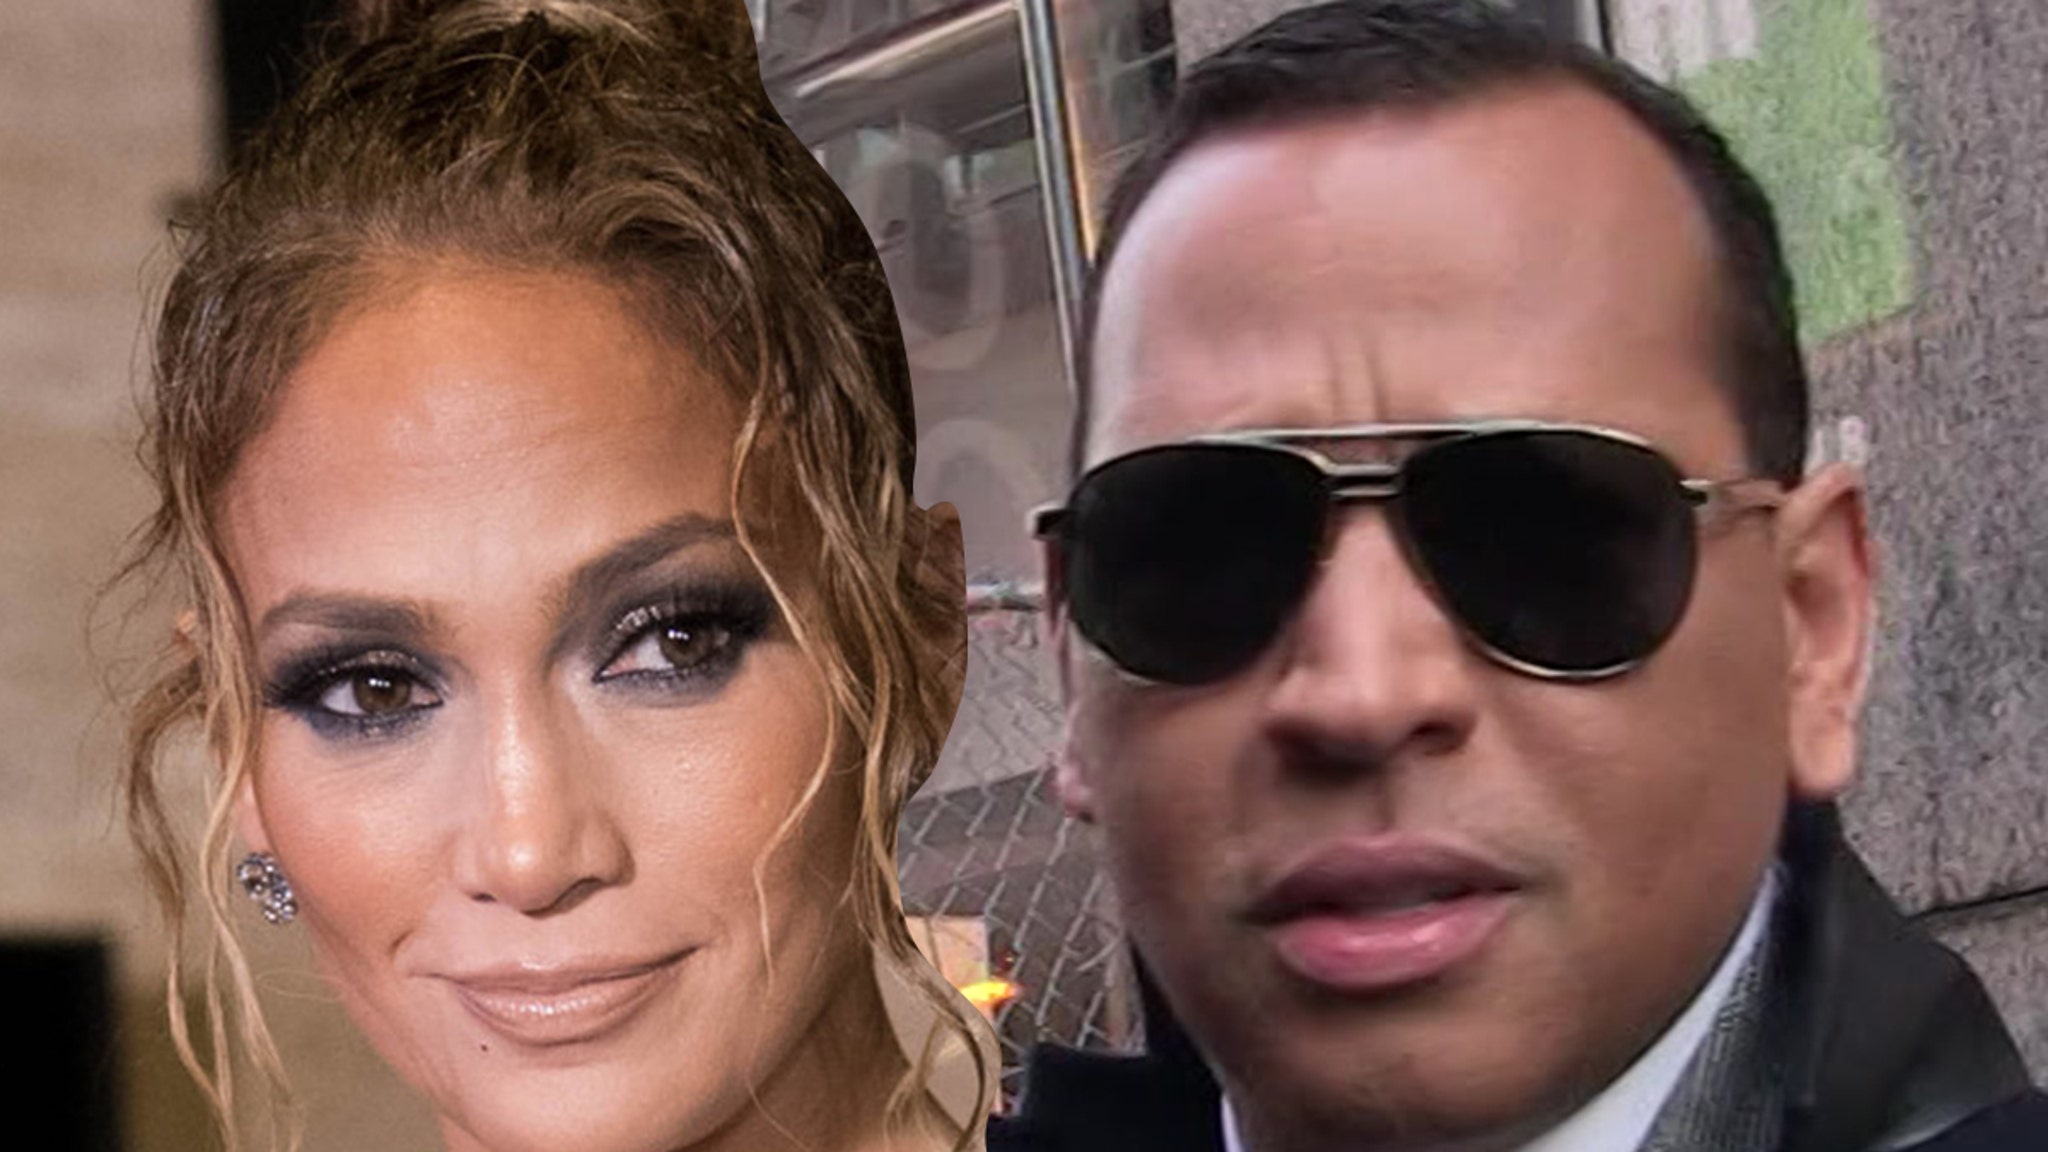 J Lo did not return the engagement ring to A-Rod